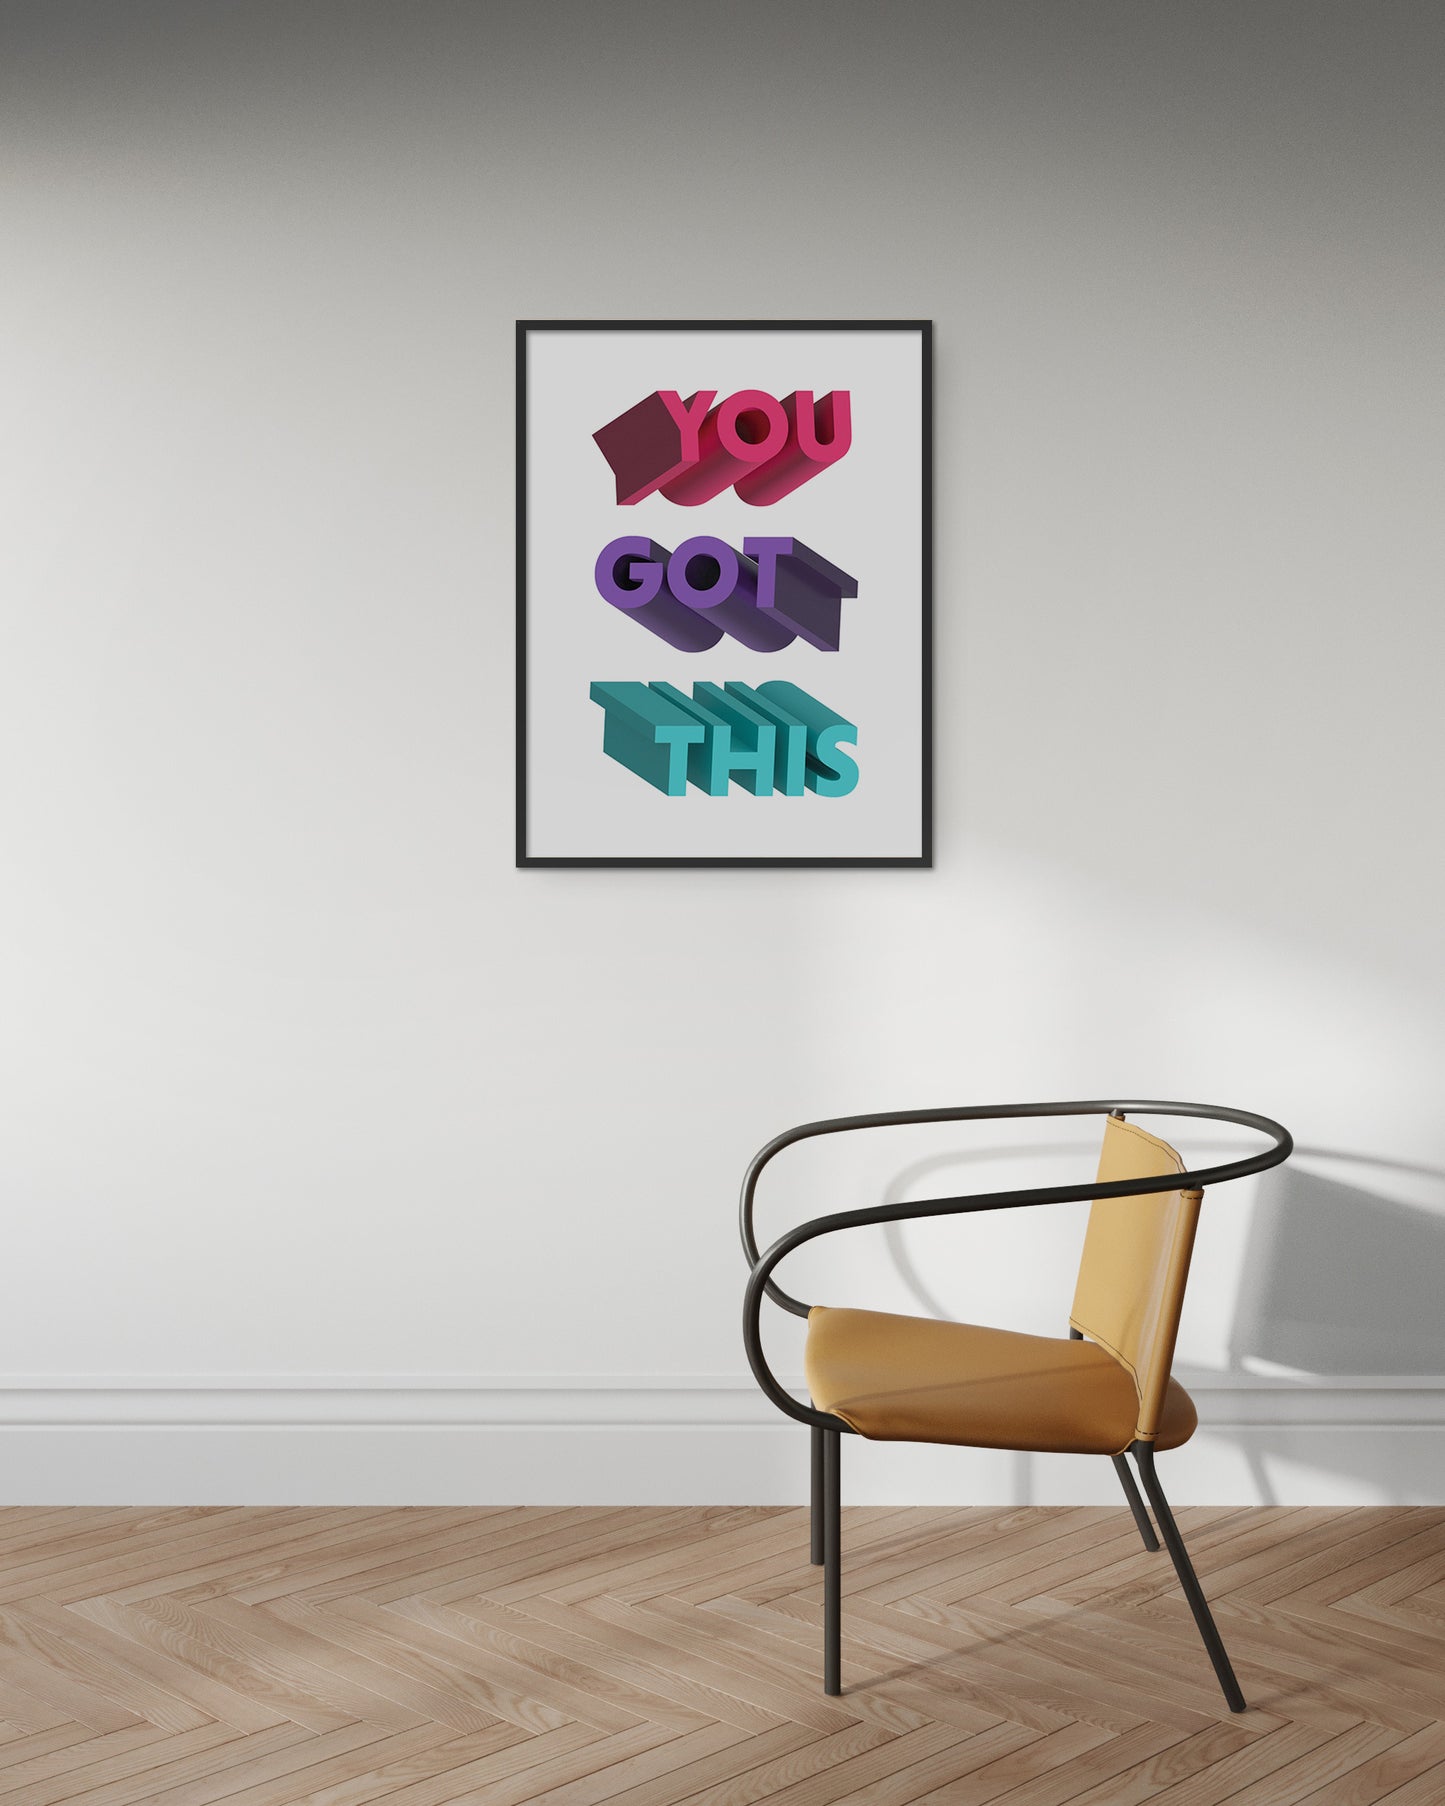 You Got This, Motivational Poster - Bold Color Typography